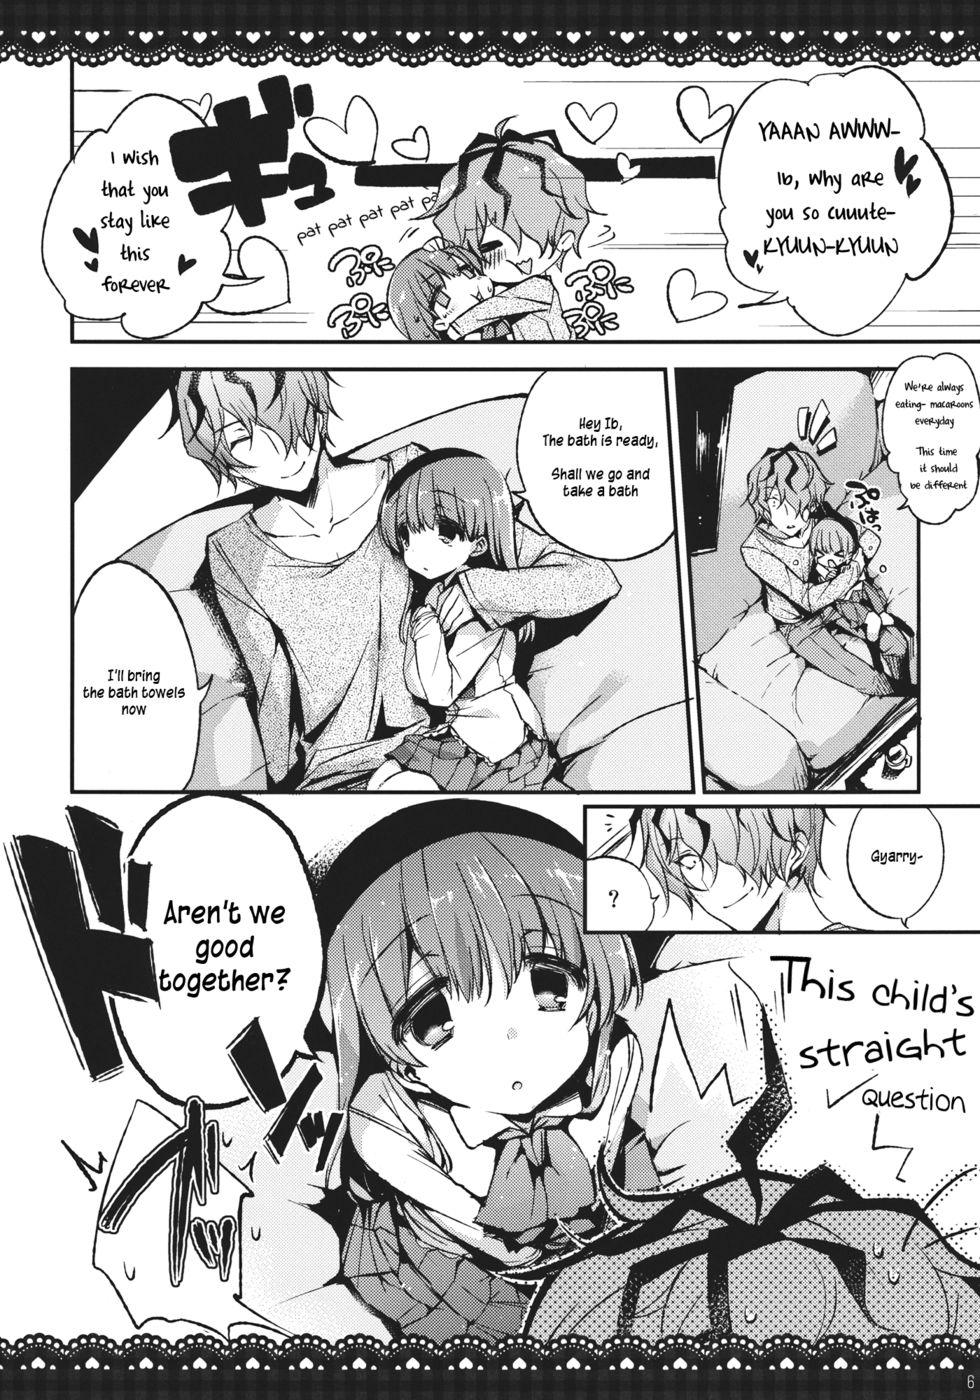 Hentai Manga Comic-What happens when you're in a bath together, Garry and Ib?-Read-5